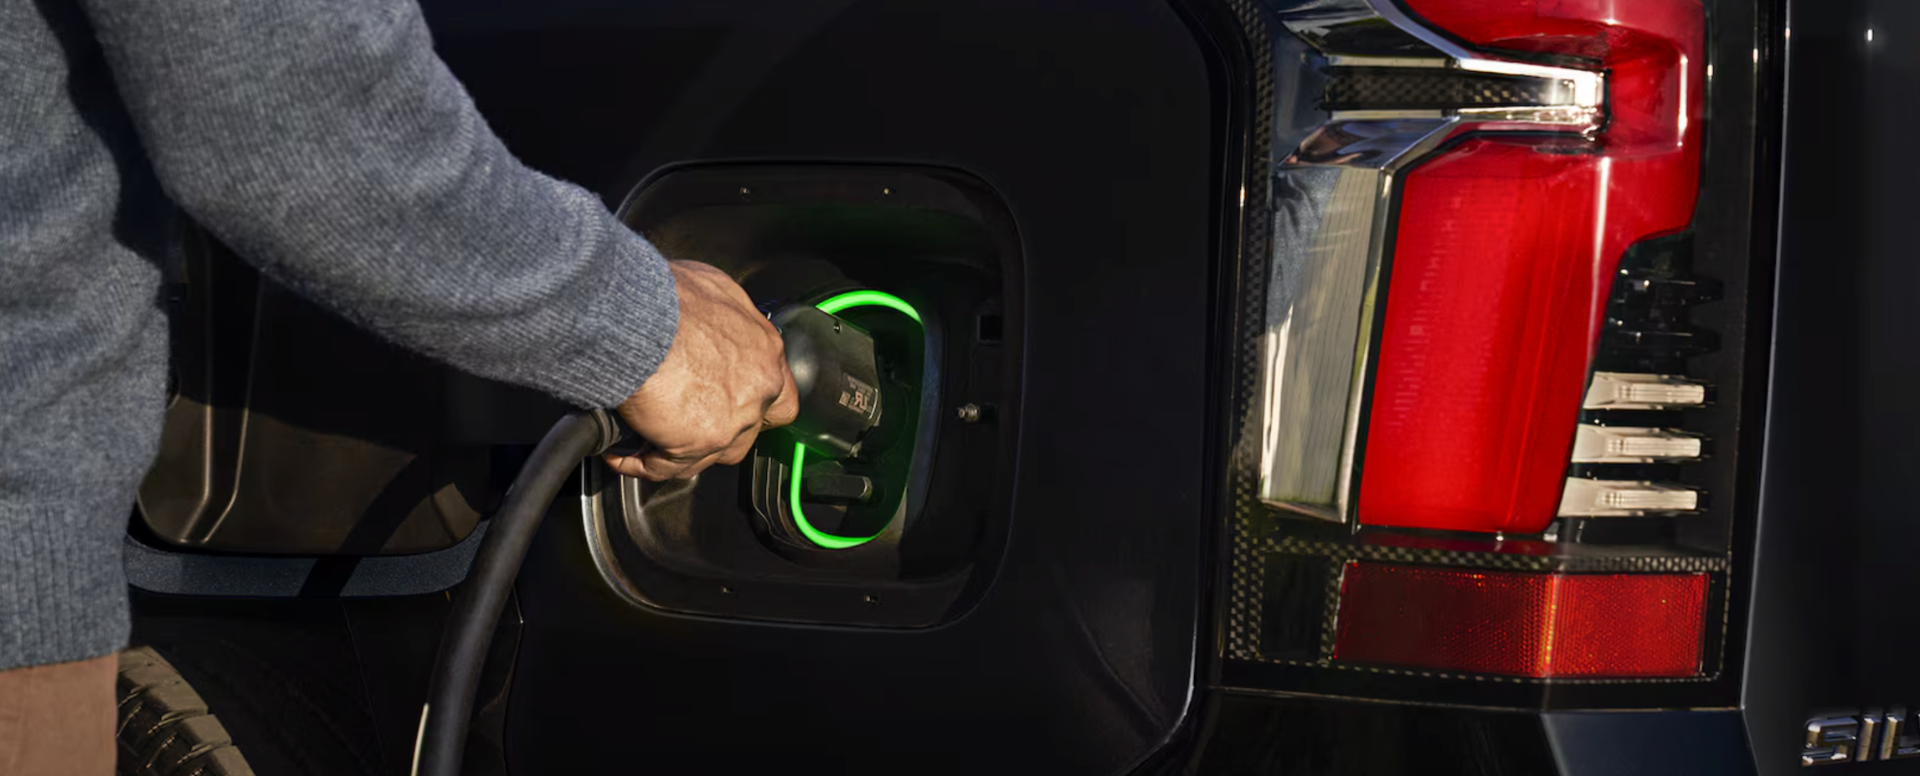 Fast home charging. Silverado fast home charging. Fast electric truck charging. Rapid charging. Public charging stations. Chevrolet electric trucks. Electric SUVs. Chevrolet electric SUVs.